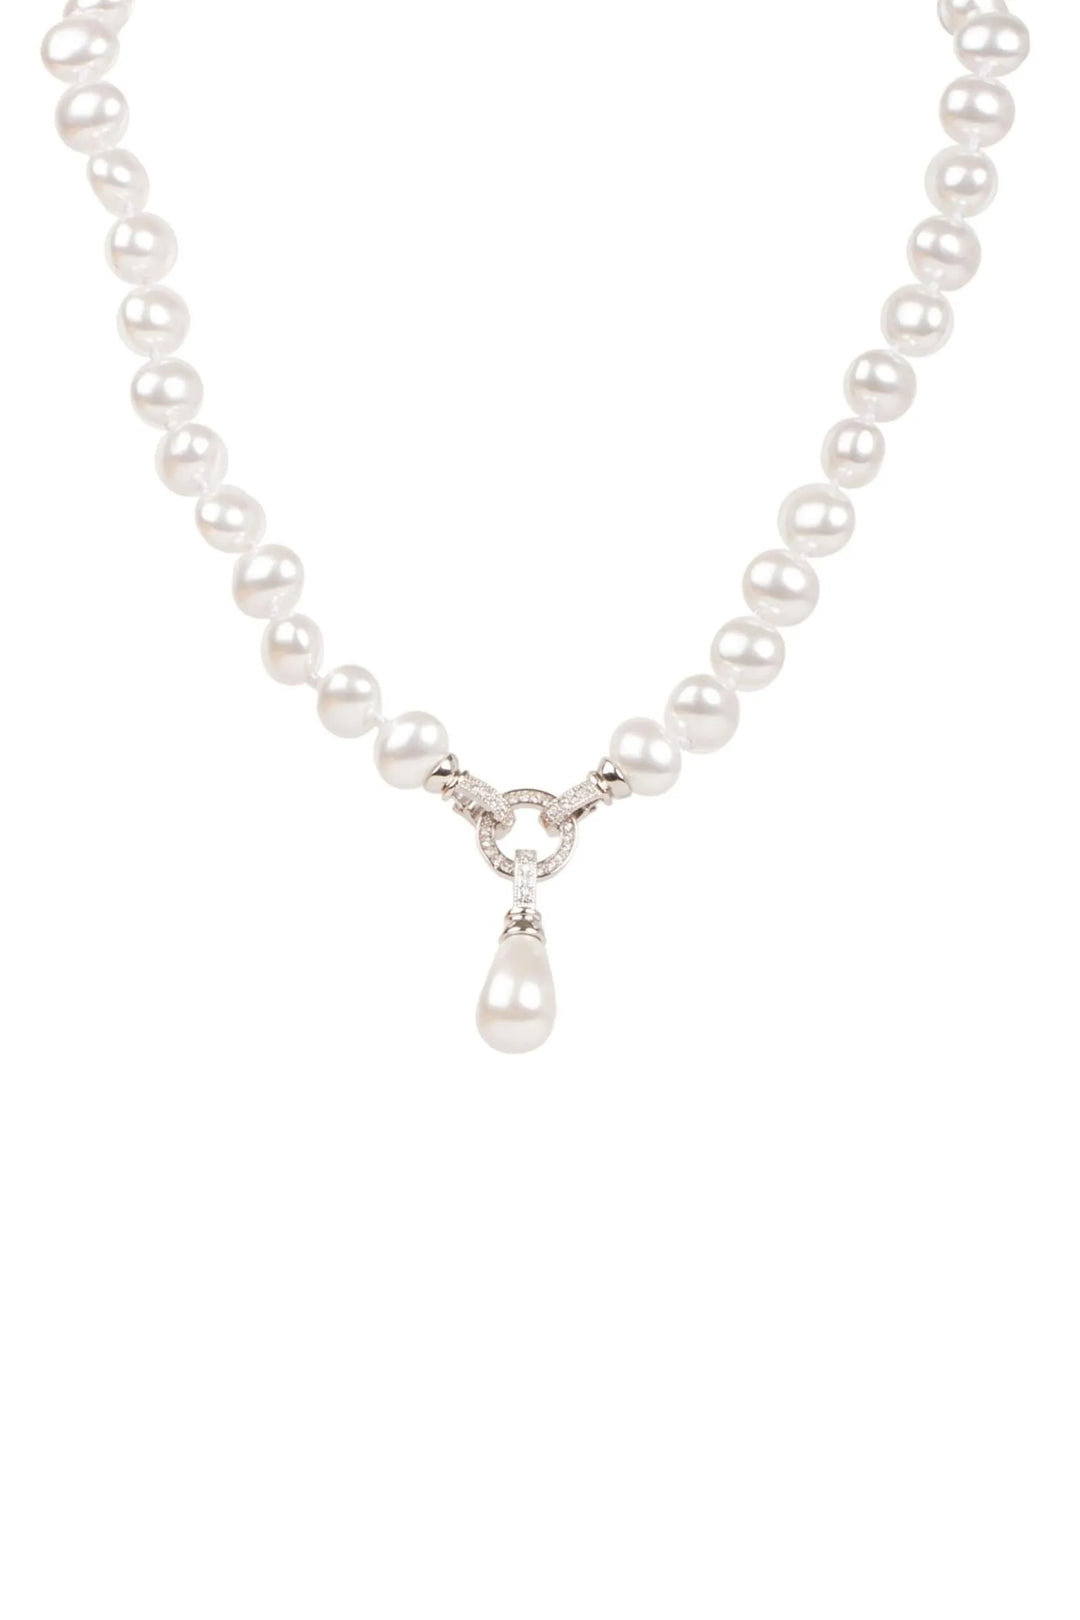  Paramount Pearl Necklace White